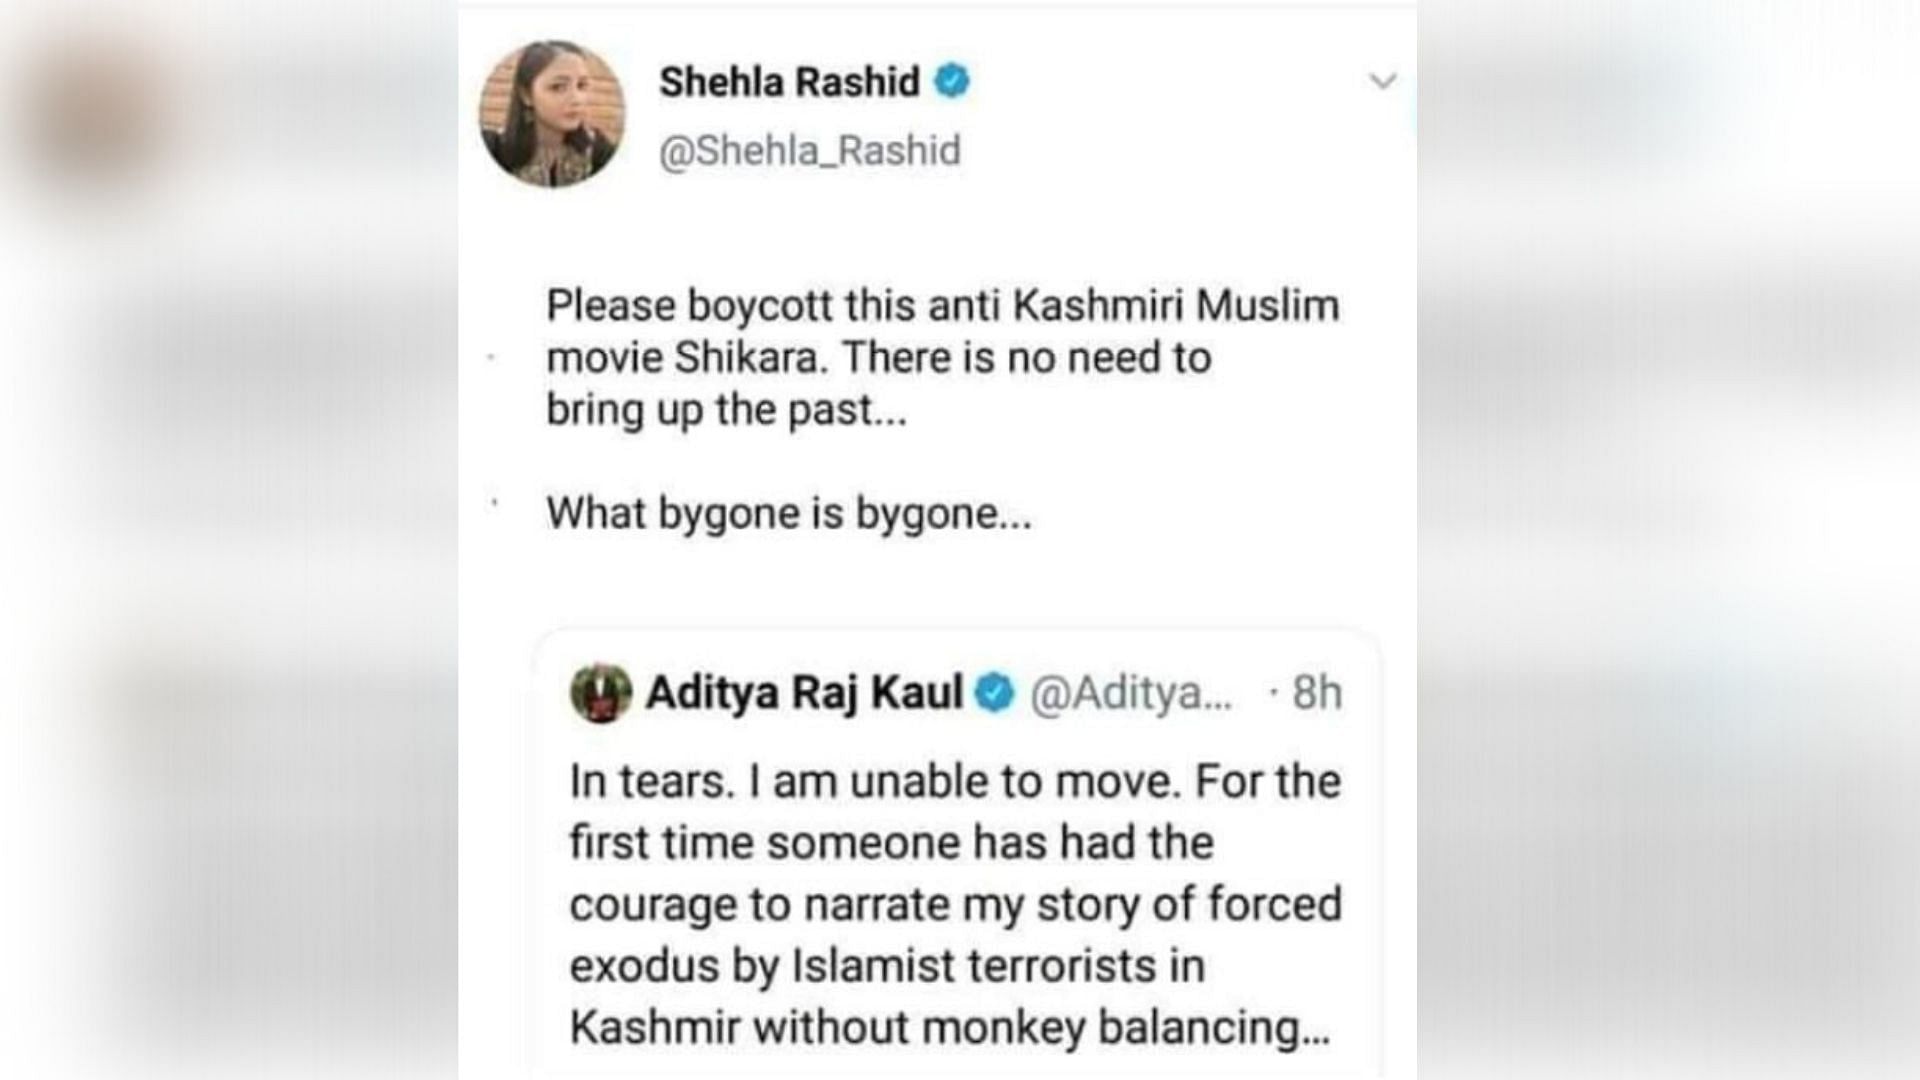 A morphed photo is being used to claim that former JNU student leader Shehla Rashid called for boycotting the film ‘Shikara’.